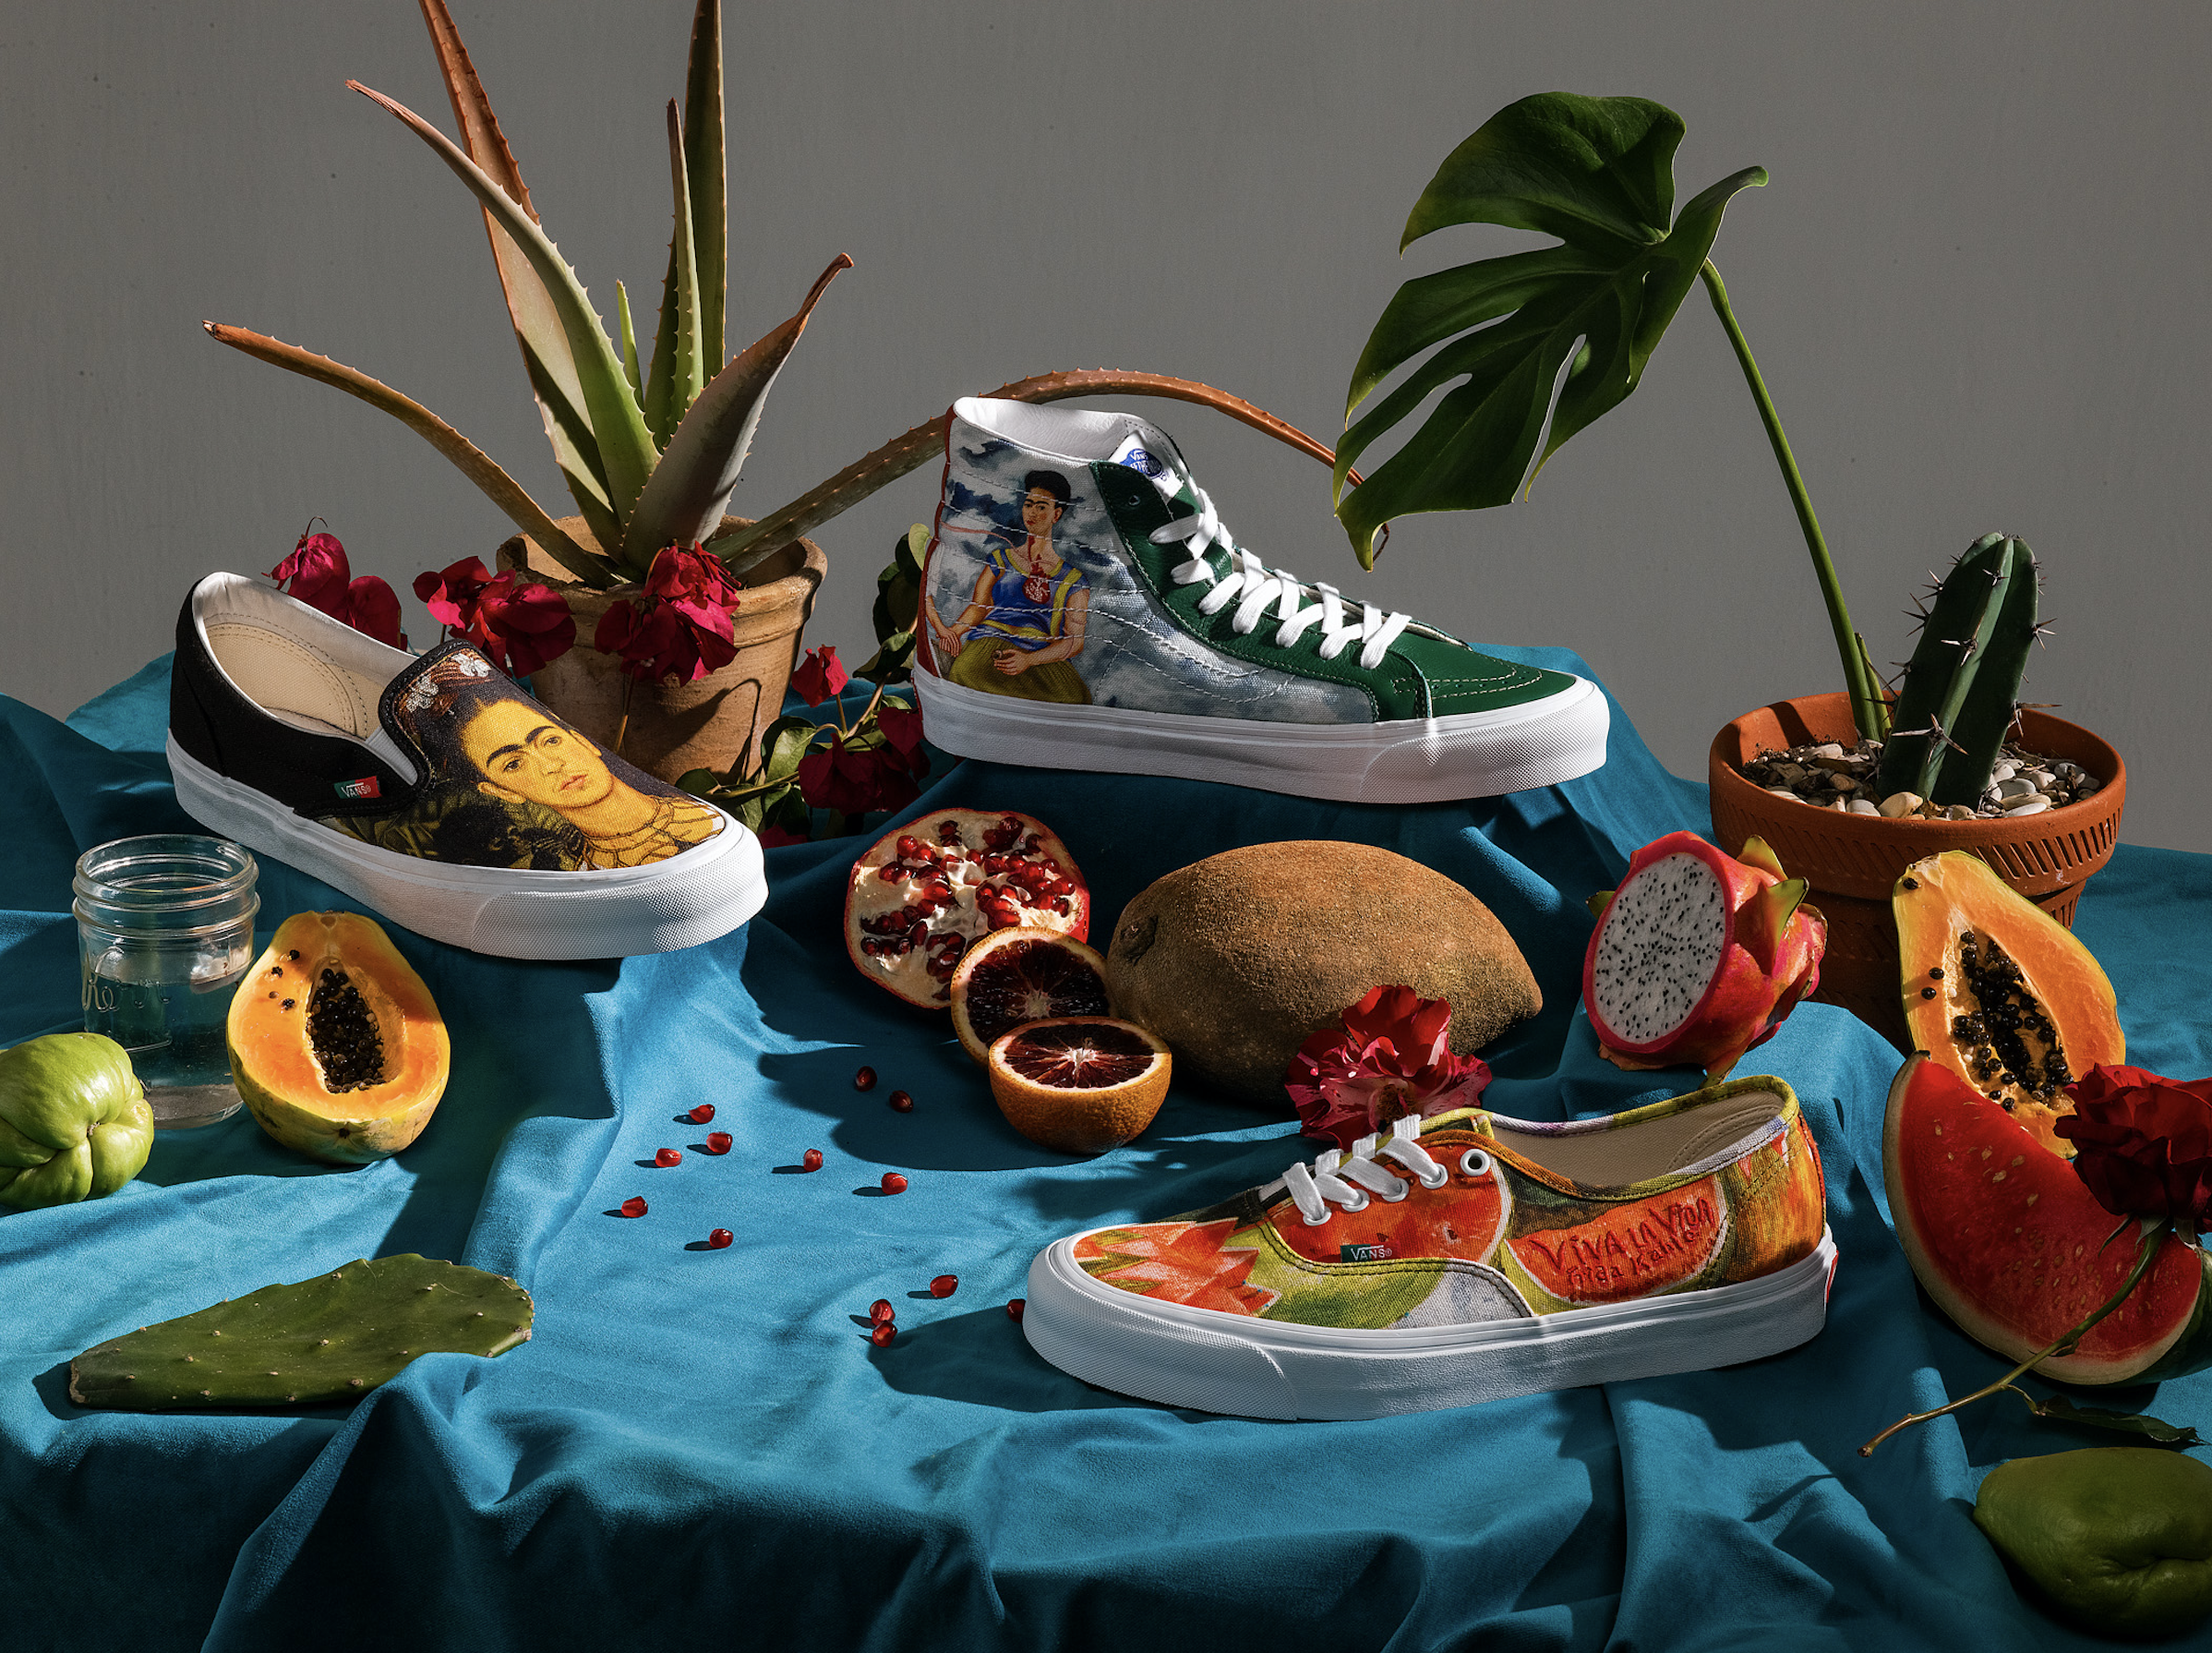 Vans pays tribute to Frida Kahlo with 